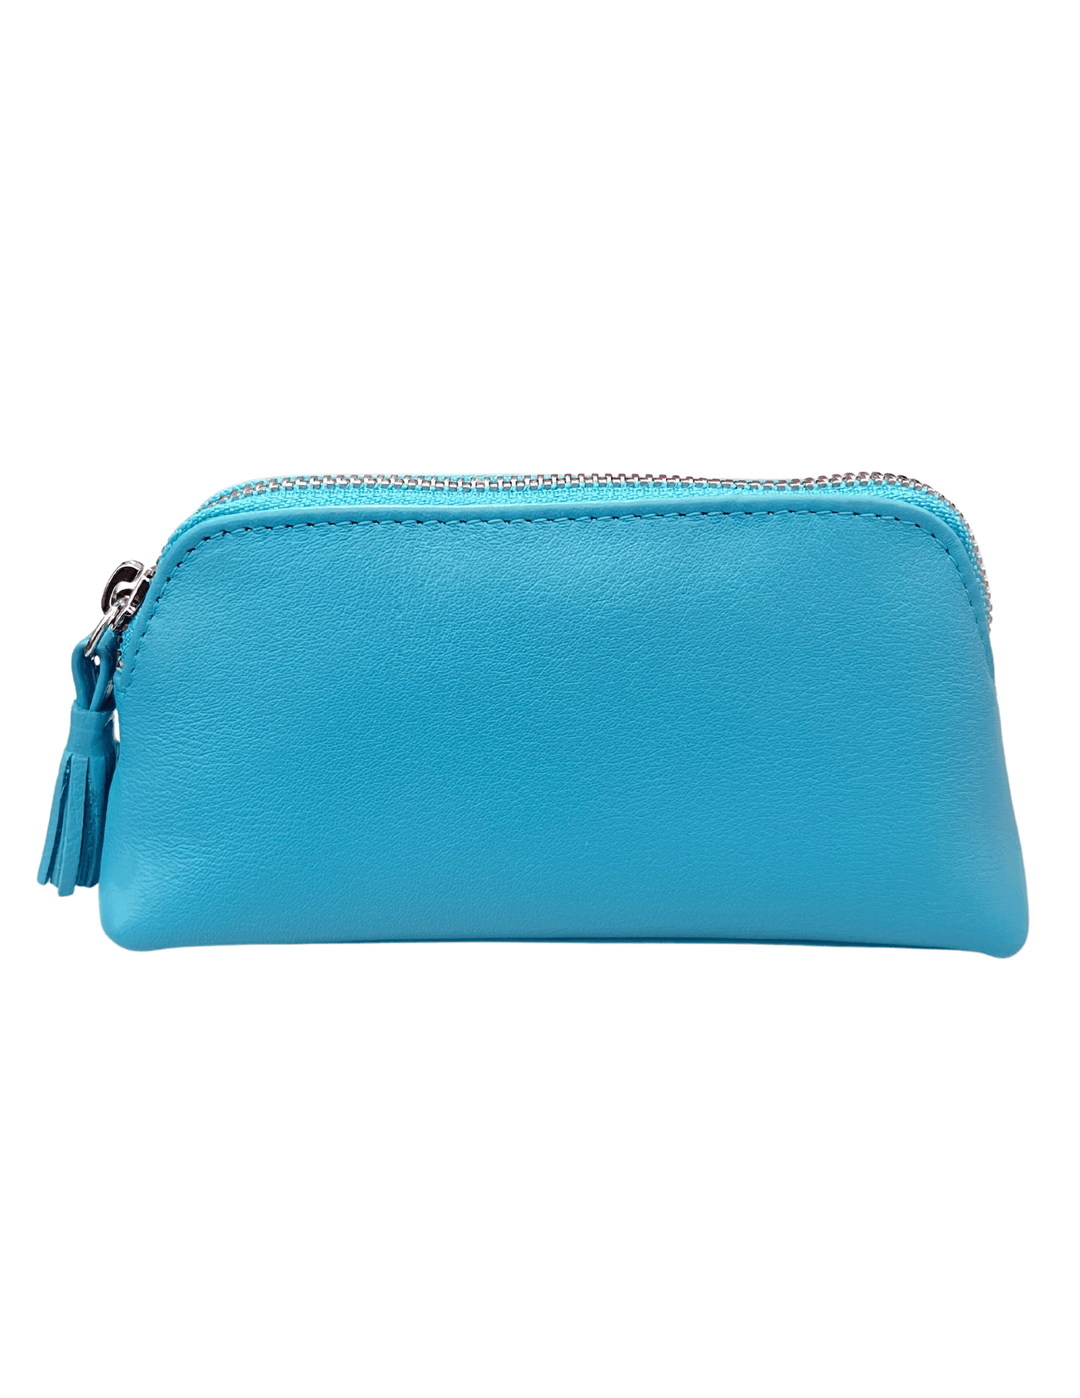 Aegean blue colorful leather goods womens gift ideas houston texas makeup bag